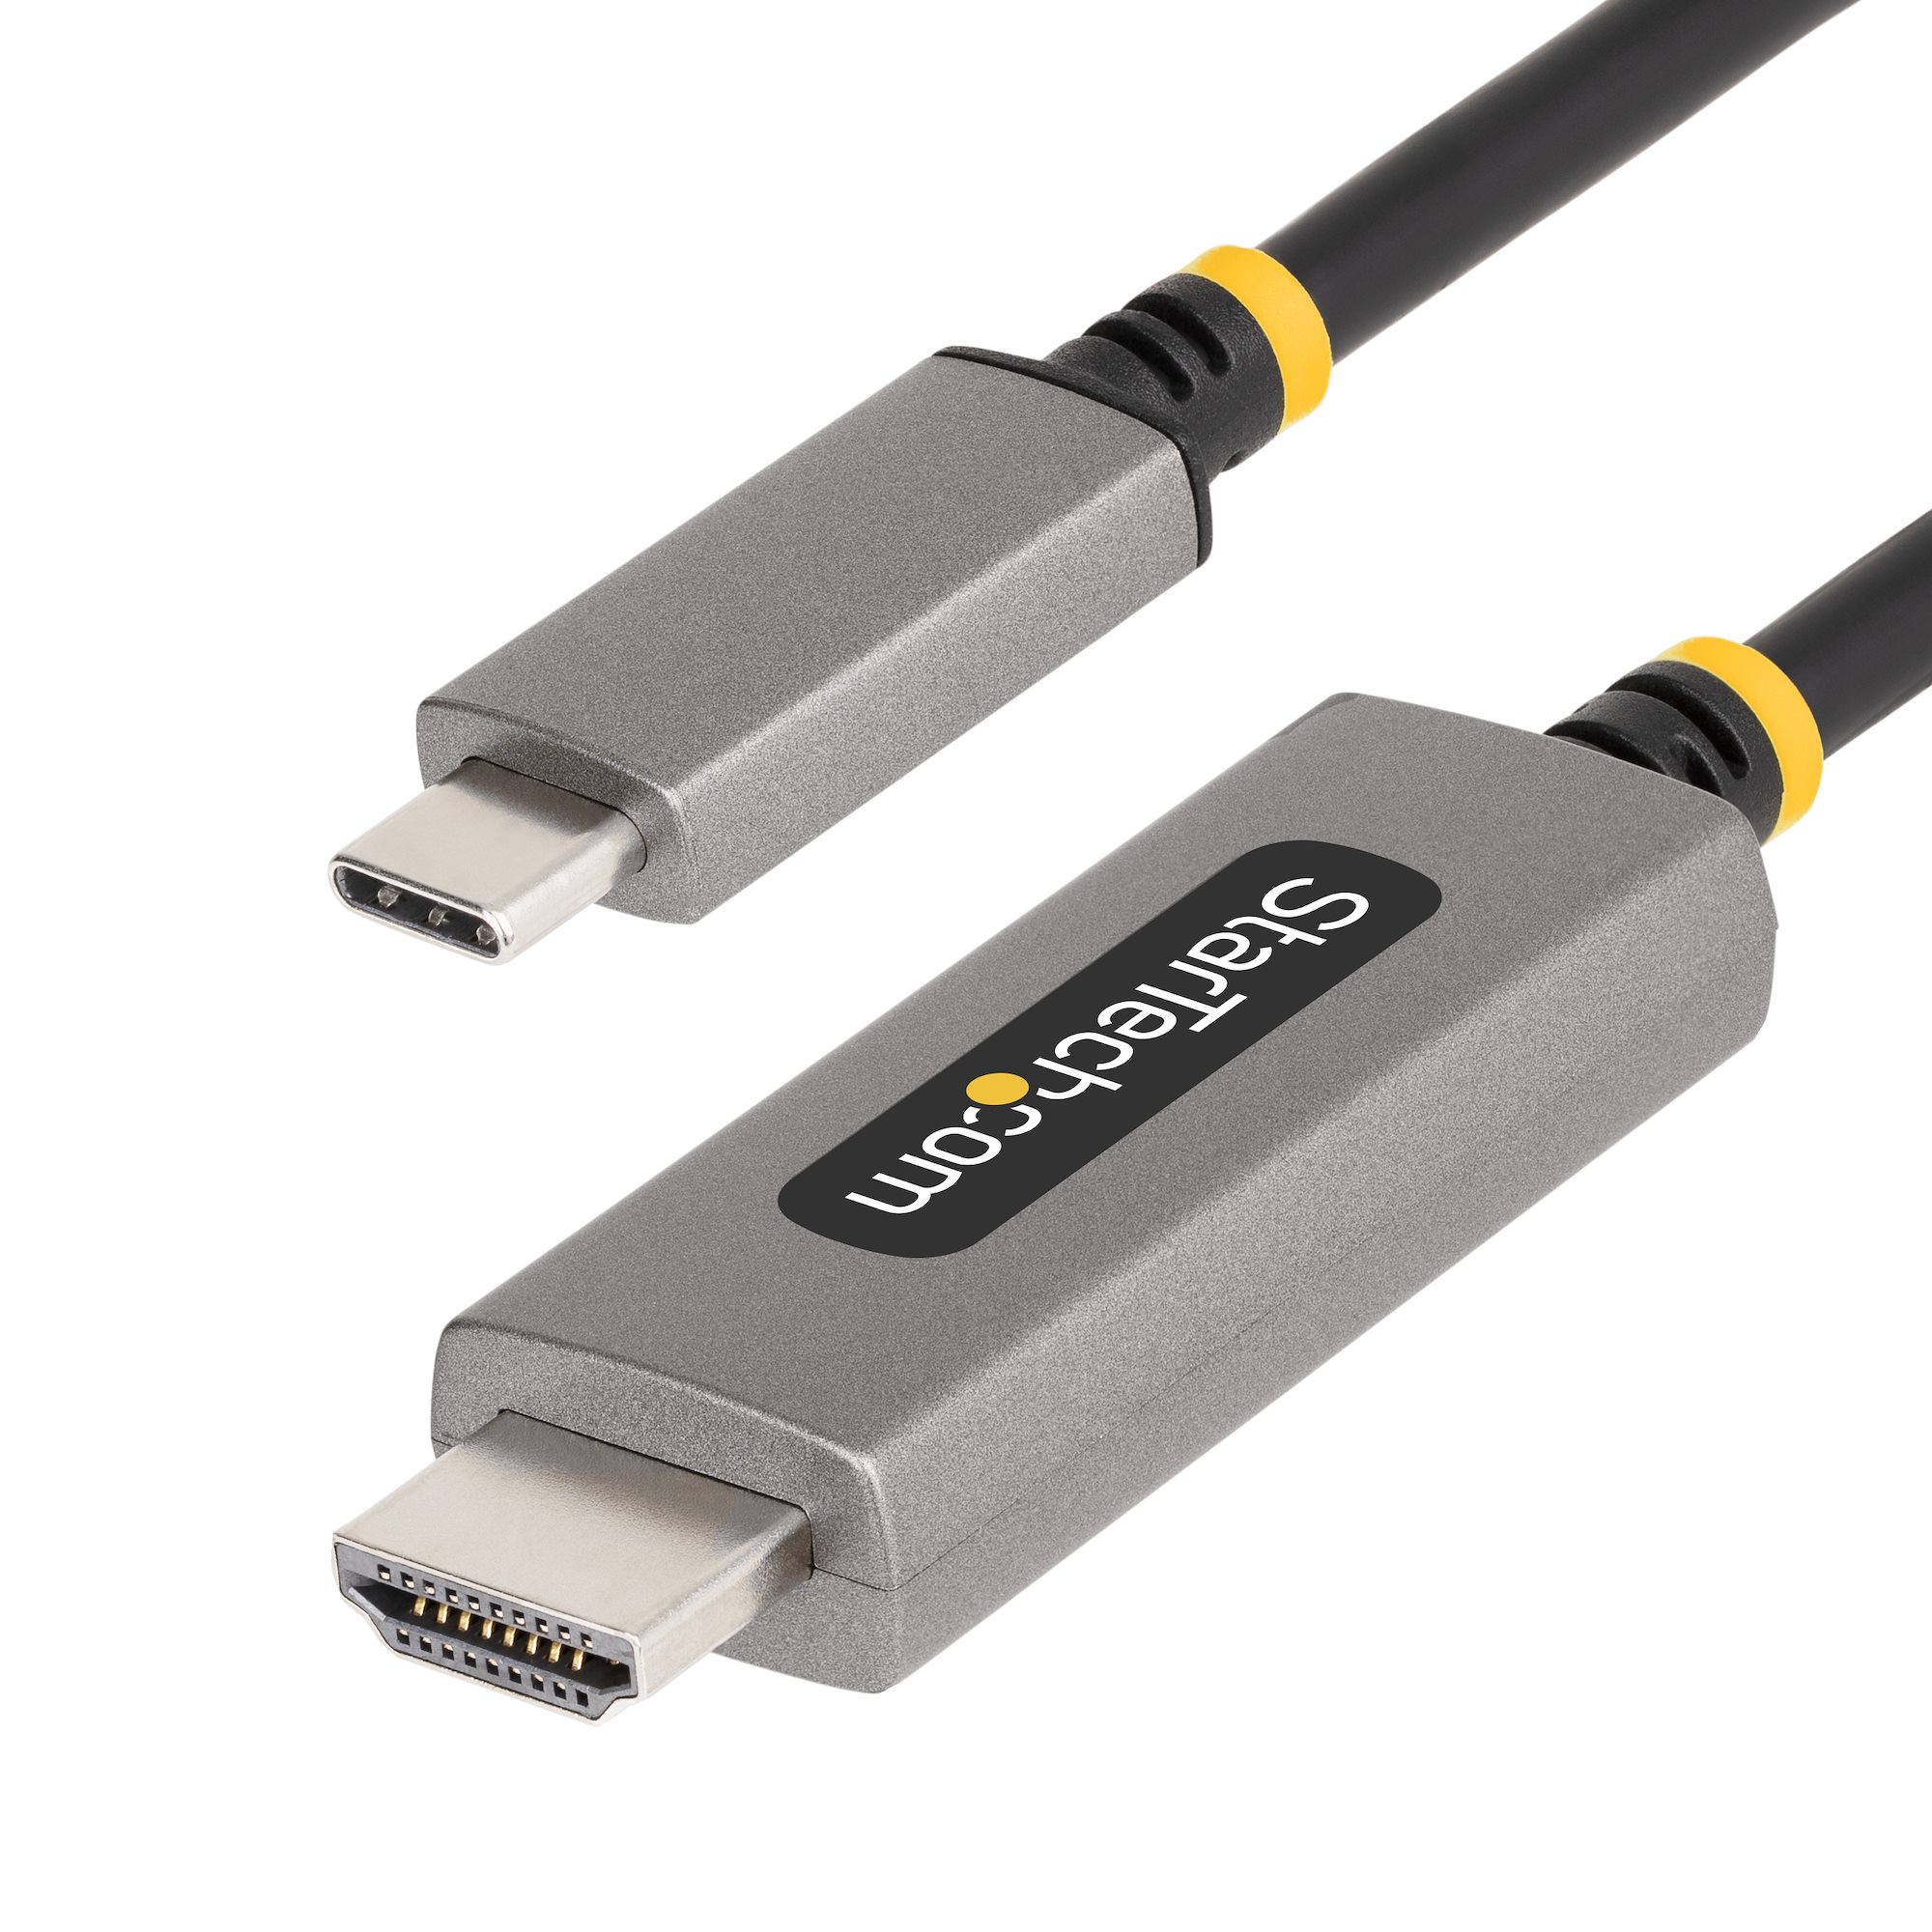 【136B-USBC-HDMI213M】USB-C TO HDMI ADAPTER CABLE